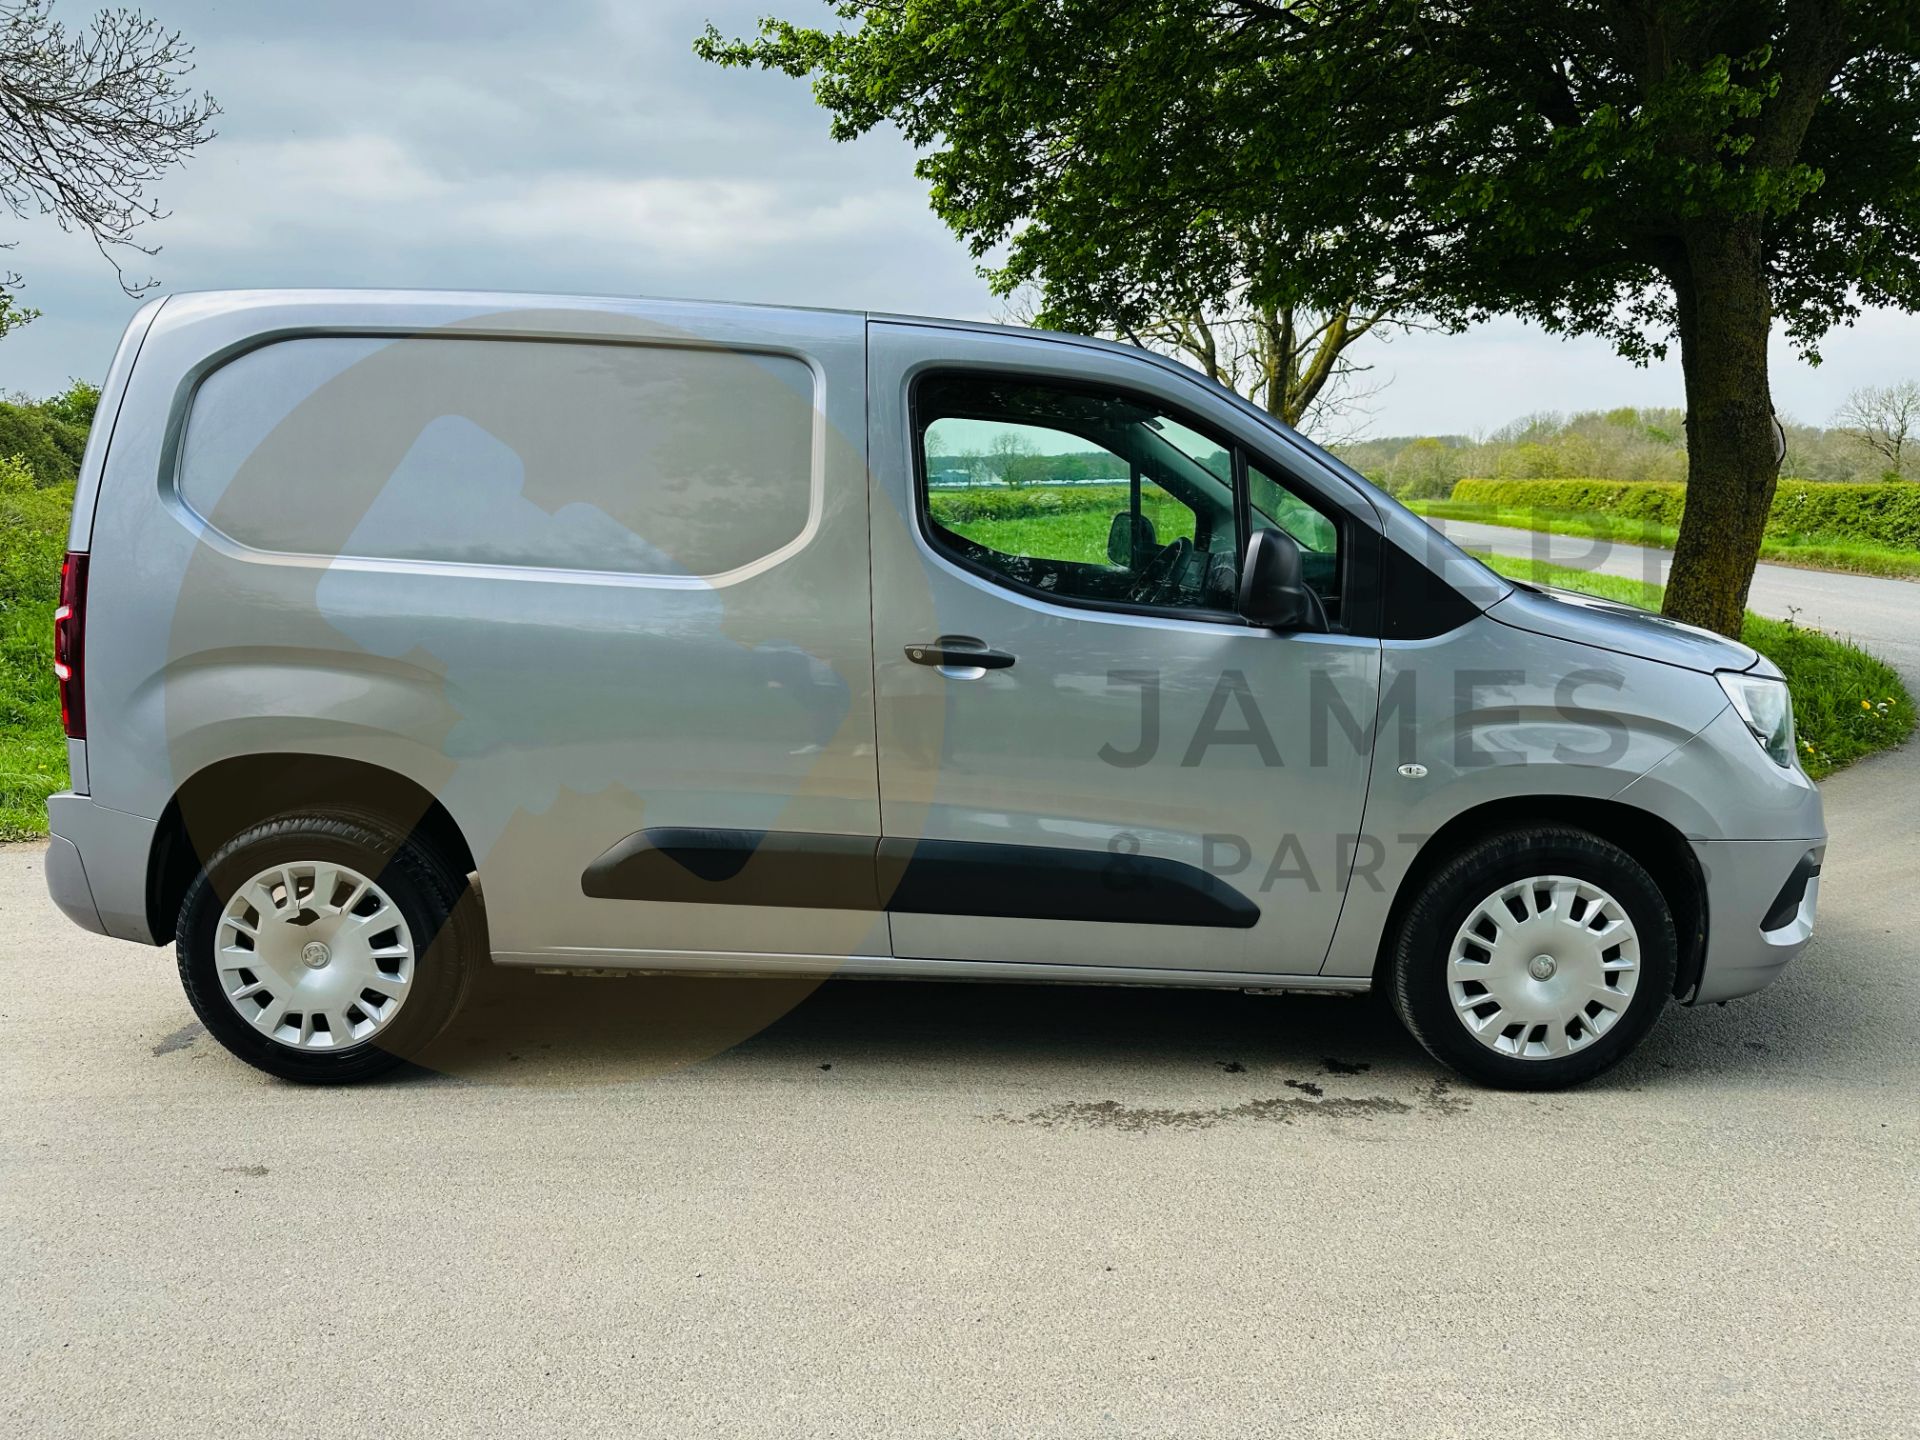 VAUXHALL COMBO 1.5CDTI *SPORTIVE EDTION* - 69 REG - 1 OWNER FROM NEW - AIR CON - EURO 6 - LOOK!!! - Image 10 of 27